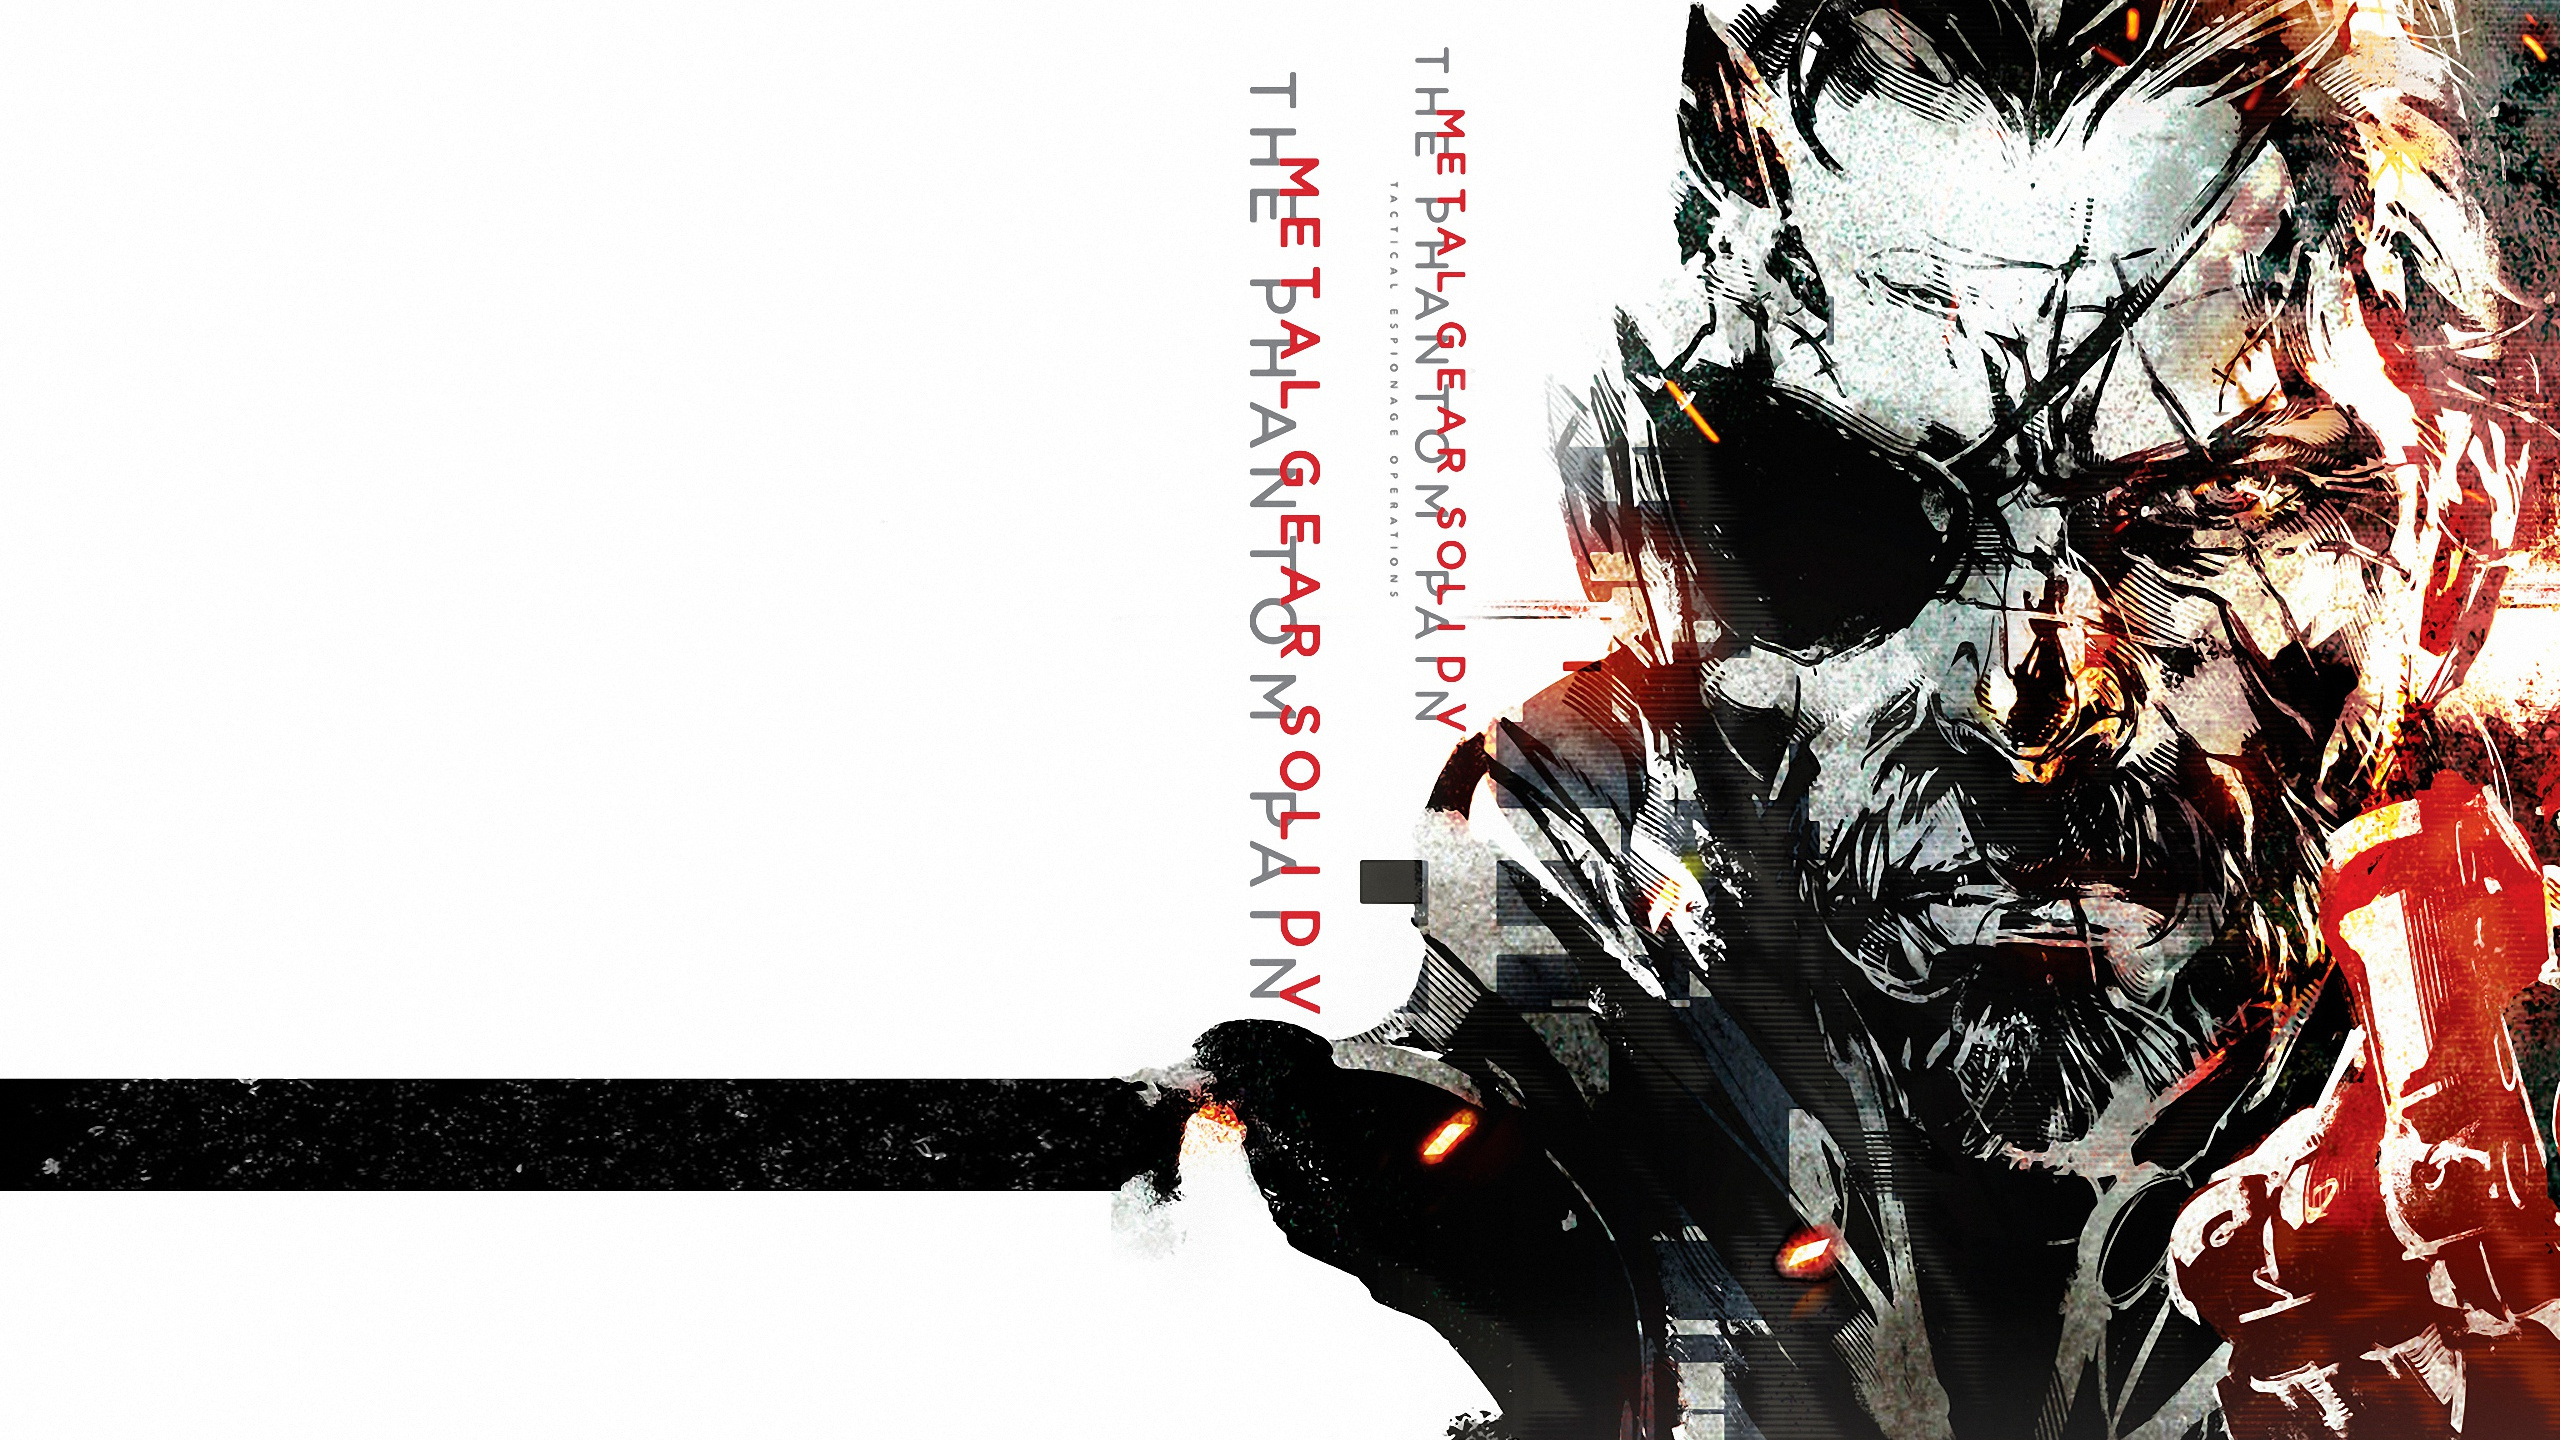 metal gear solid, warrior, video game, metal gear solid v: the phantom pain